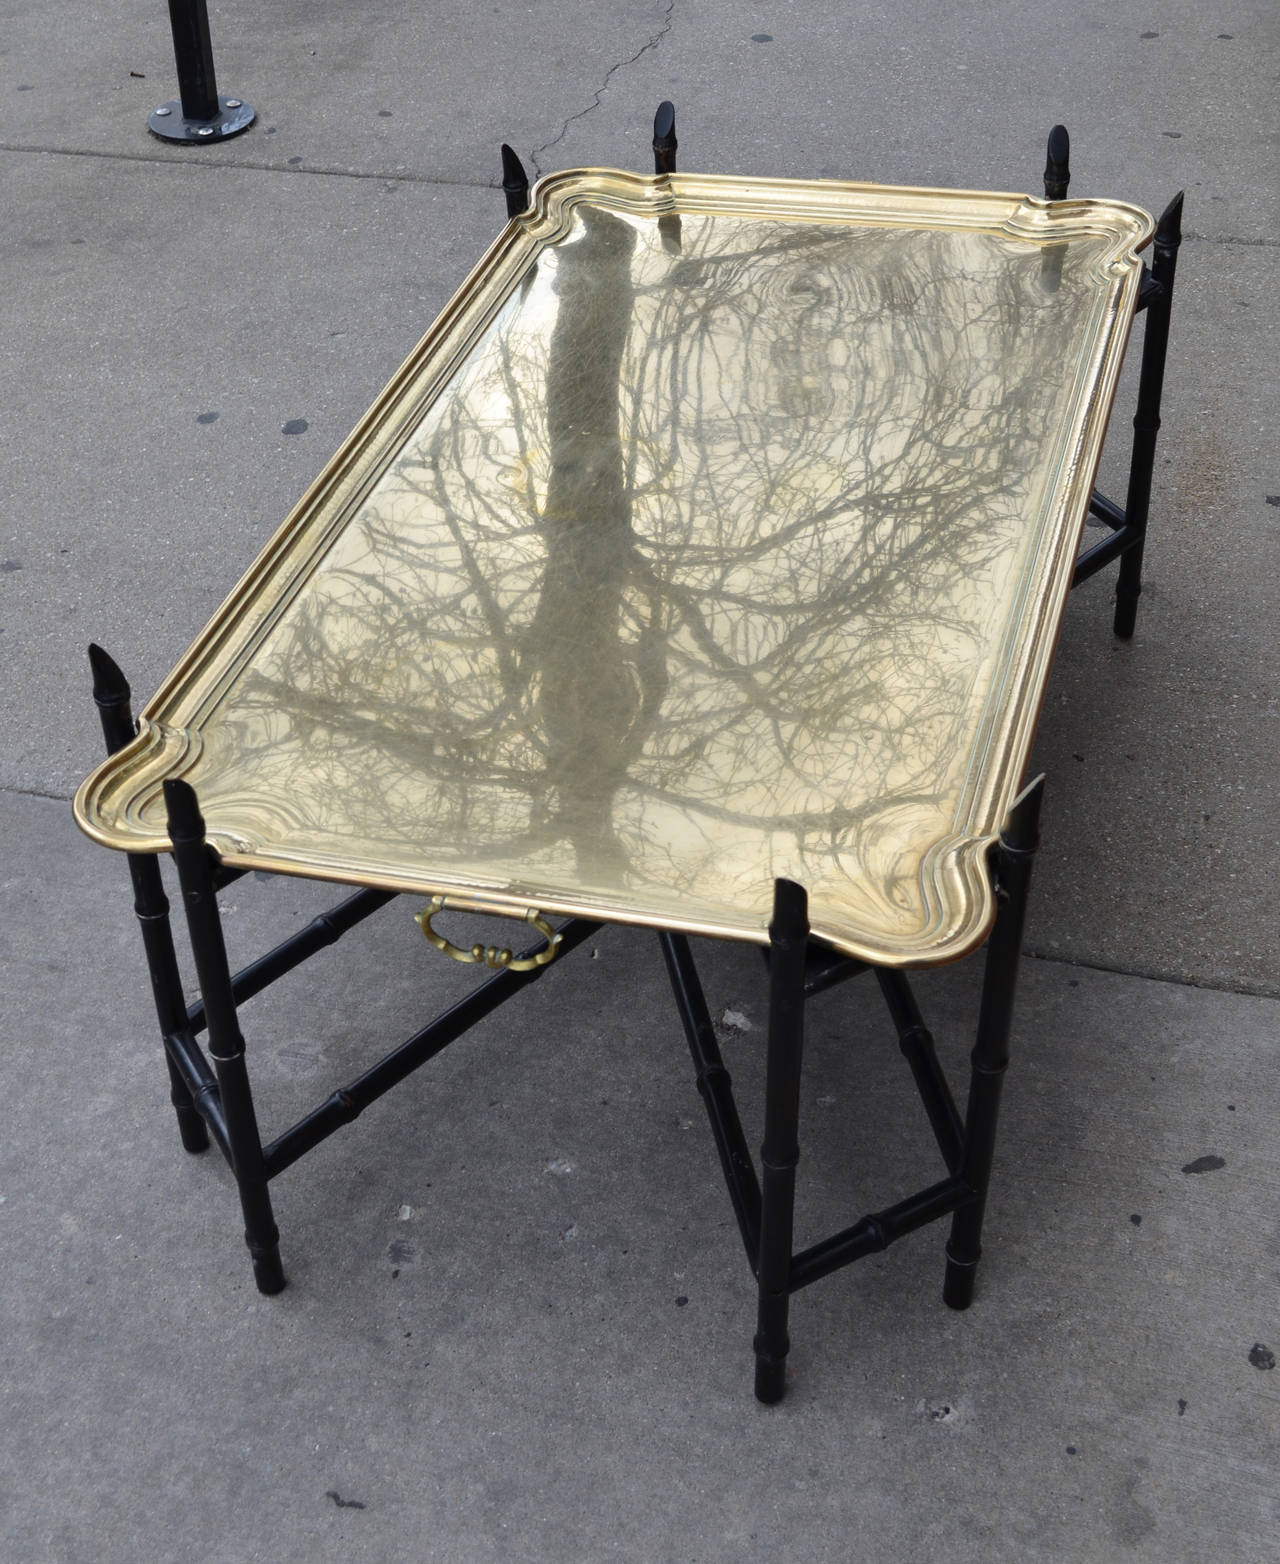 A monumental German heavy brass tray coffee table on a wood bamboo base.